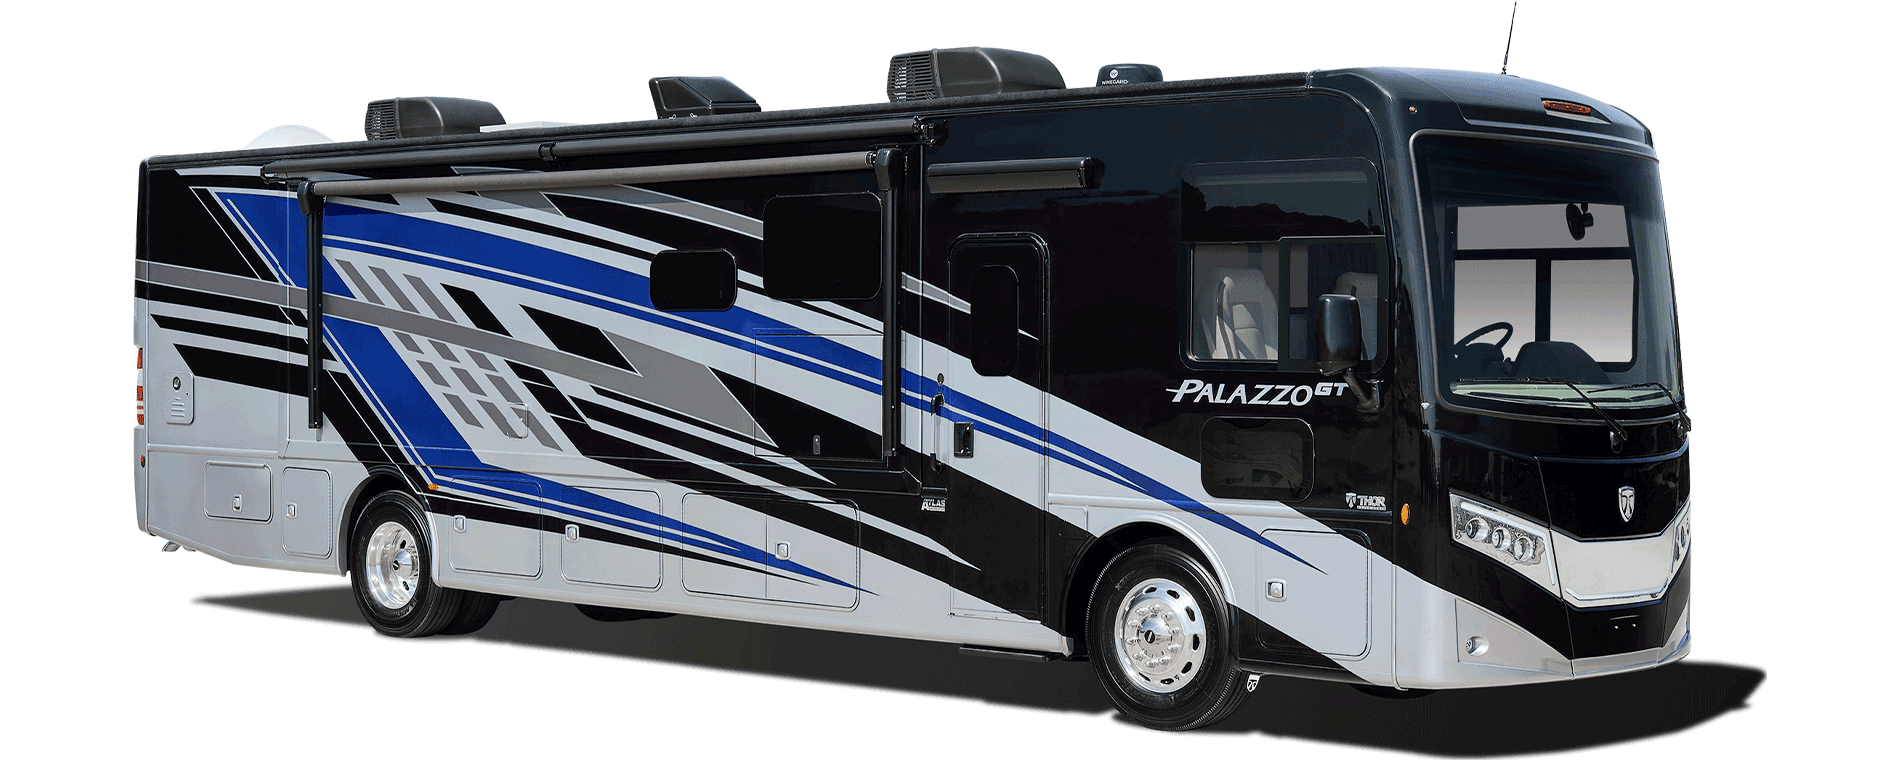 Palazzo GT Class A diesel motorhome with Pacific Coast paint exterior